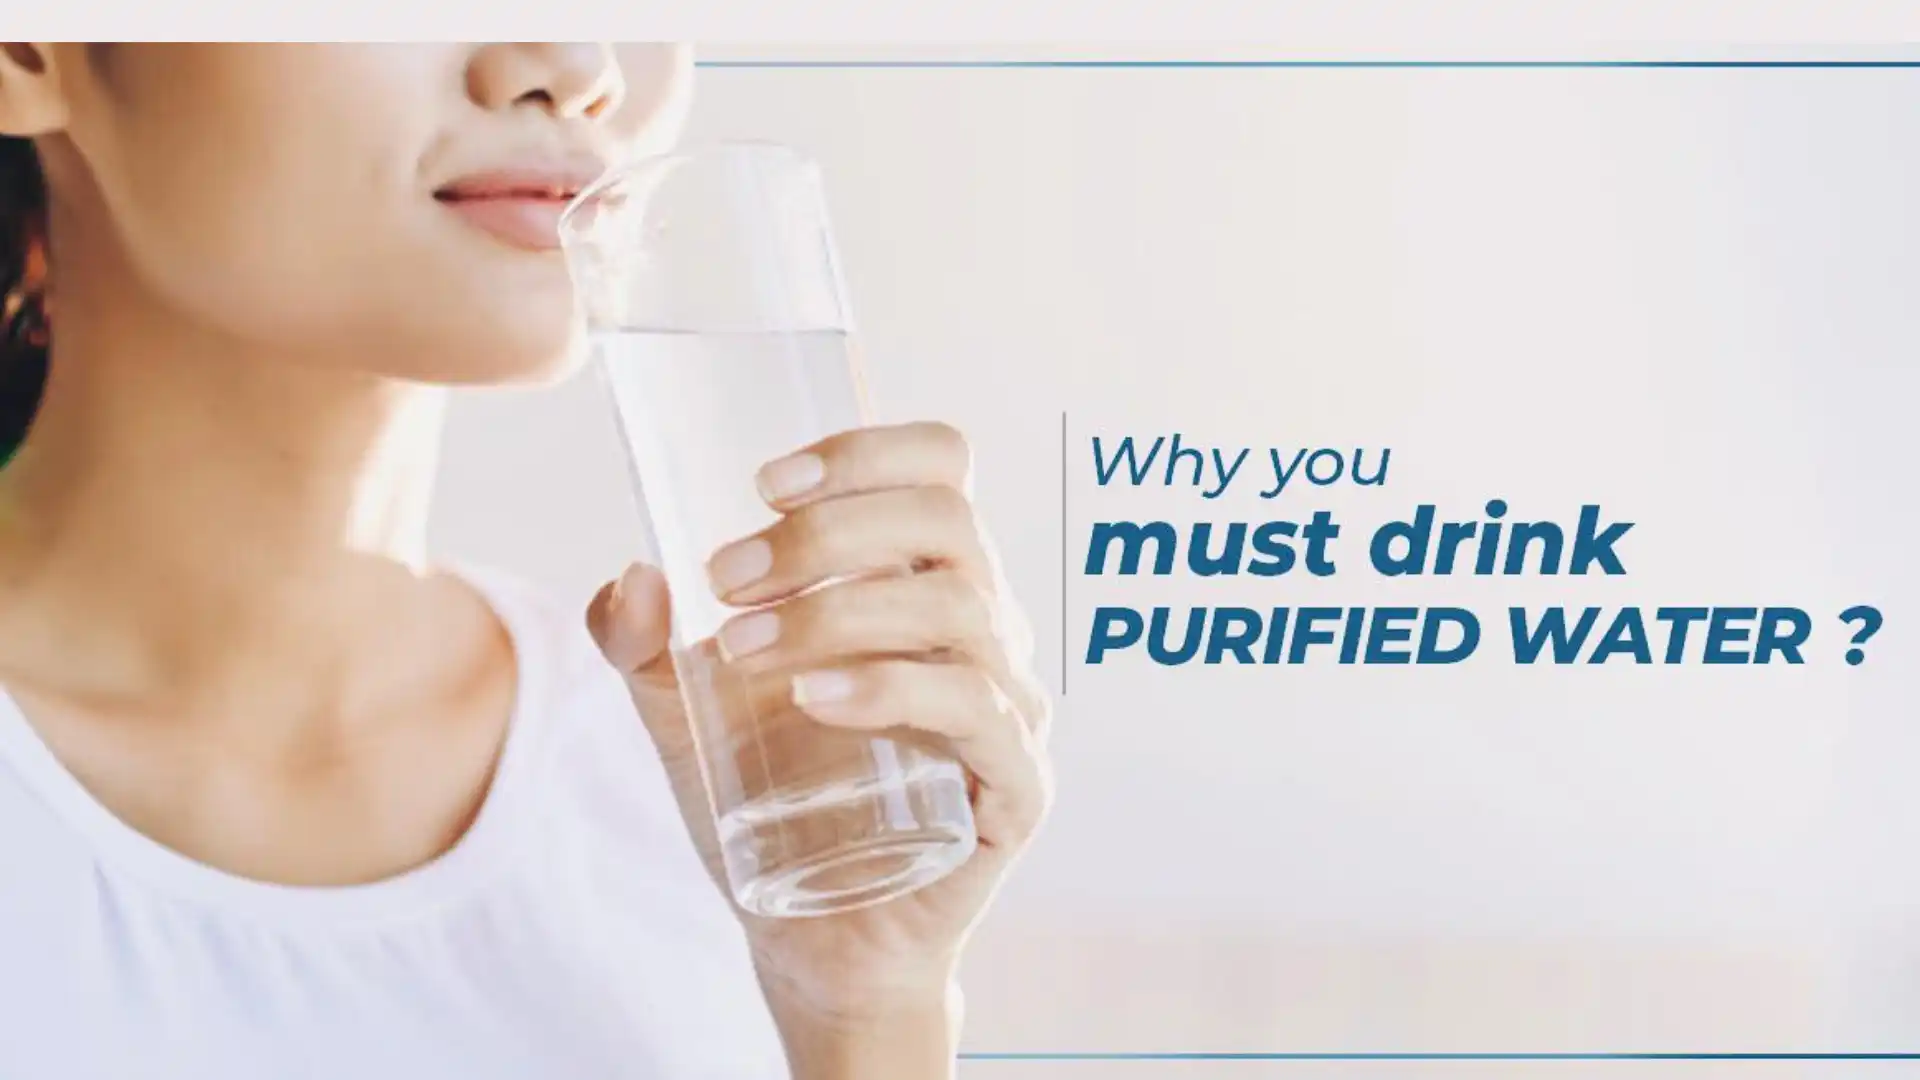 What are the Reasons to Purify Drinking Water?